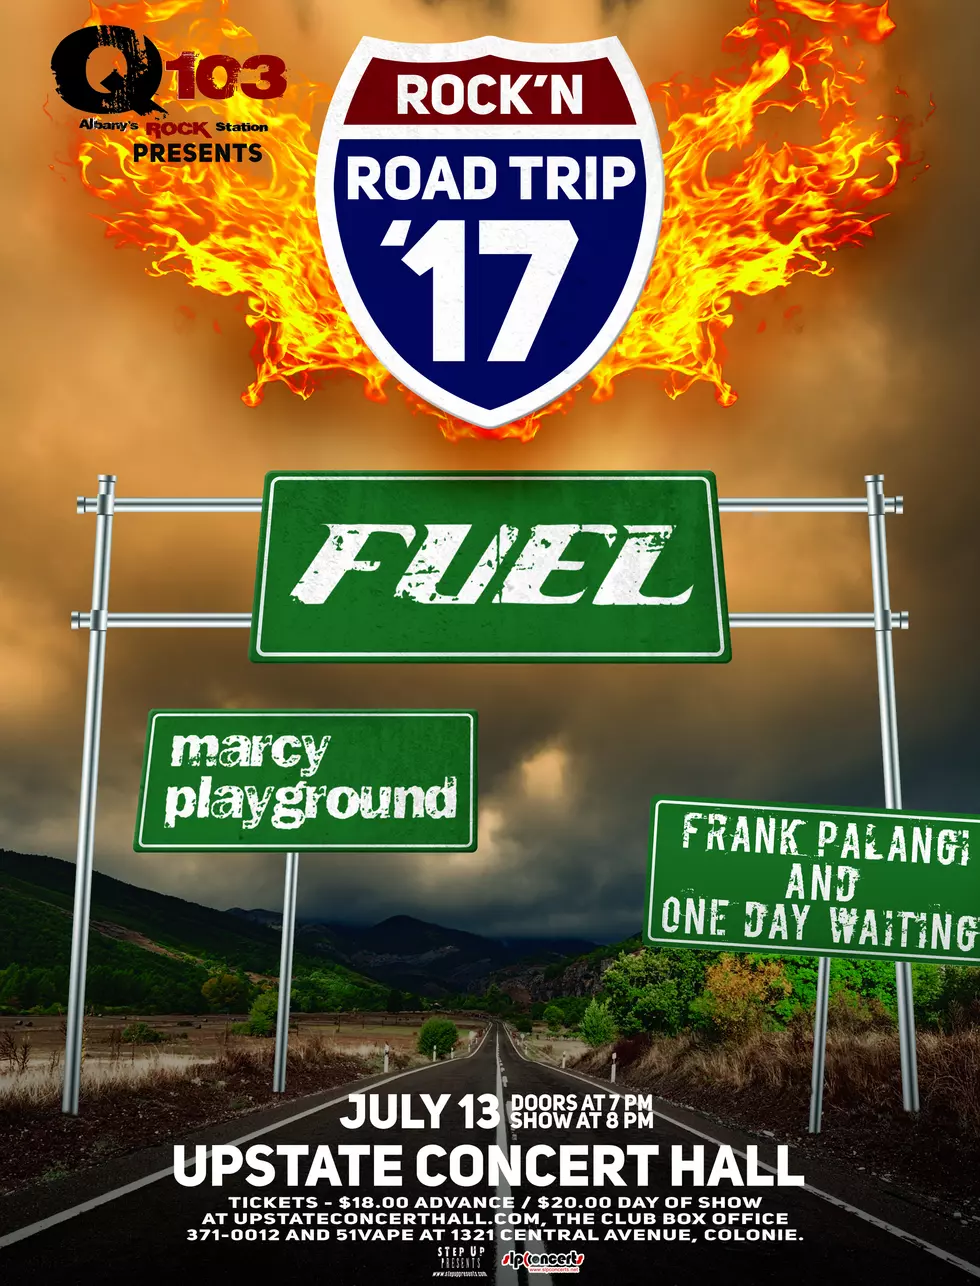 Q103 Presents Fuel’s “Rock’N Road Trip ’17” Tour at the Upstate Concert Hall